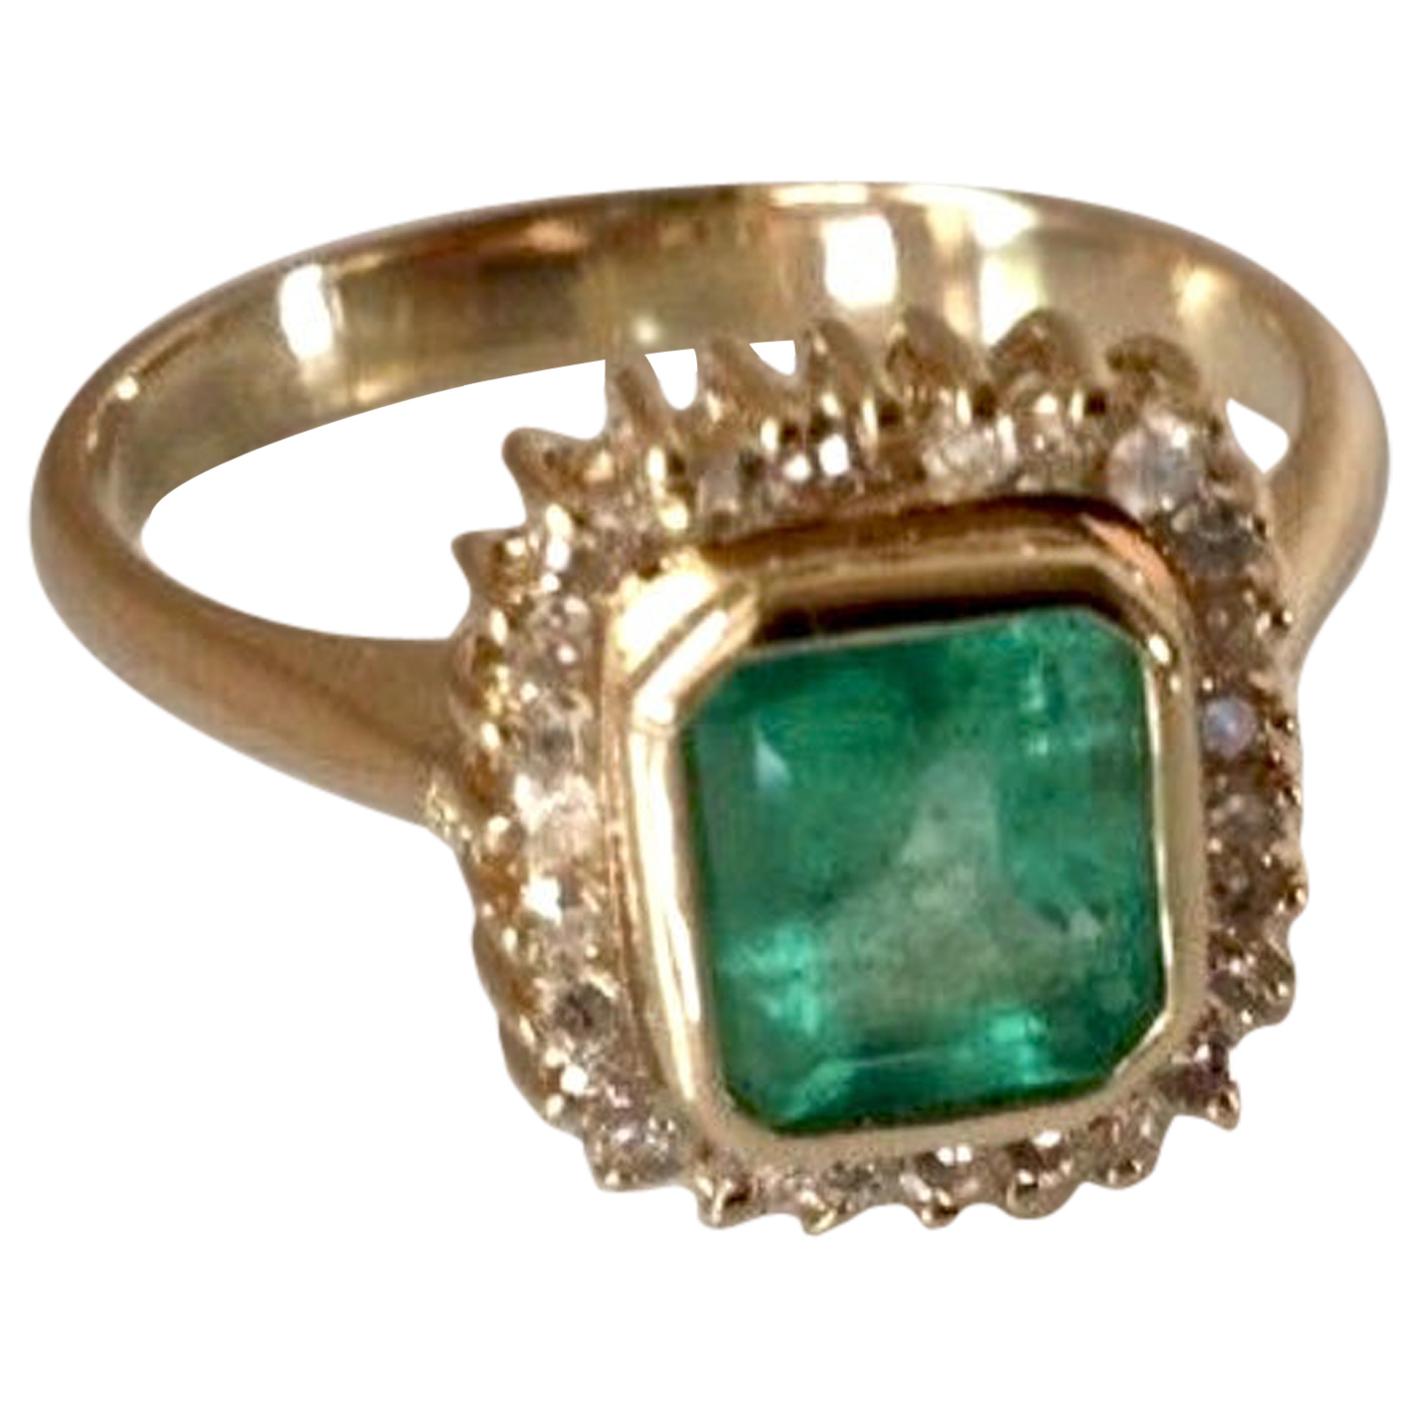 This is a beautiful and classic design 1.75 carat Emerald Diamond engagement Ring
Feature 1 genuine and natural COLOMBIAN emerald, emerald cut 1.50 Carat. The emerald is bezel set Shimmering Medium Green, very good clarity. The Ring is made of solid